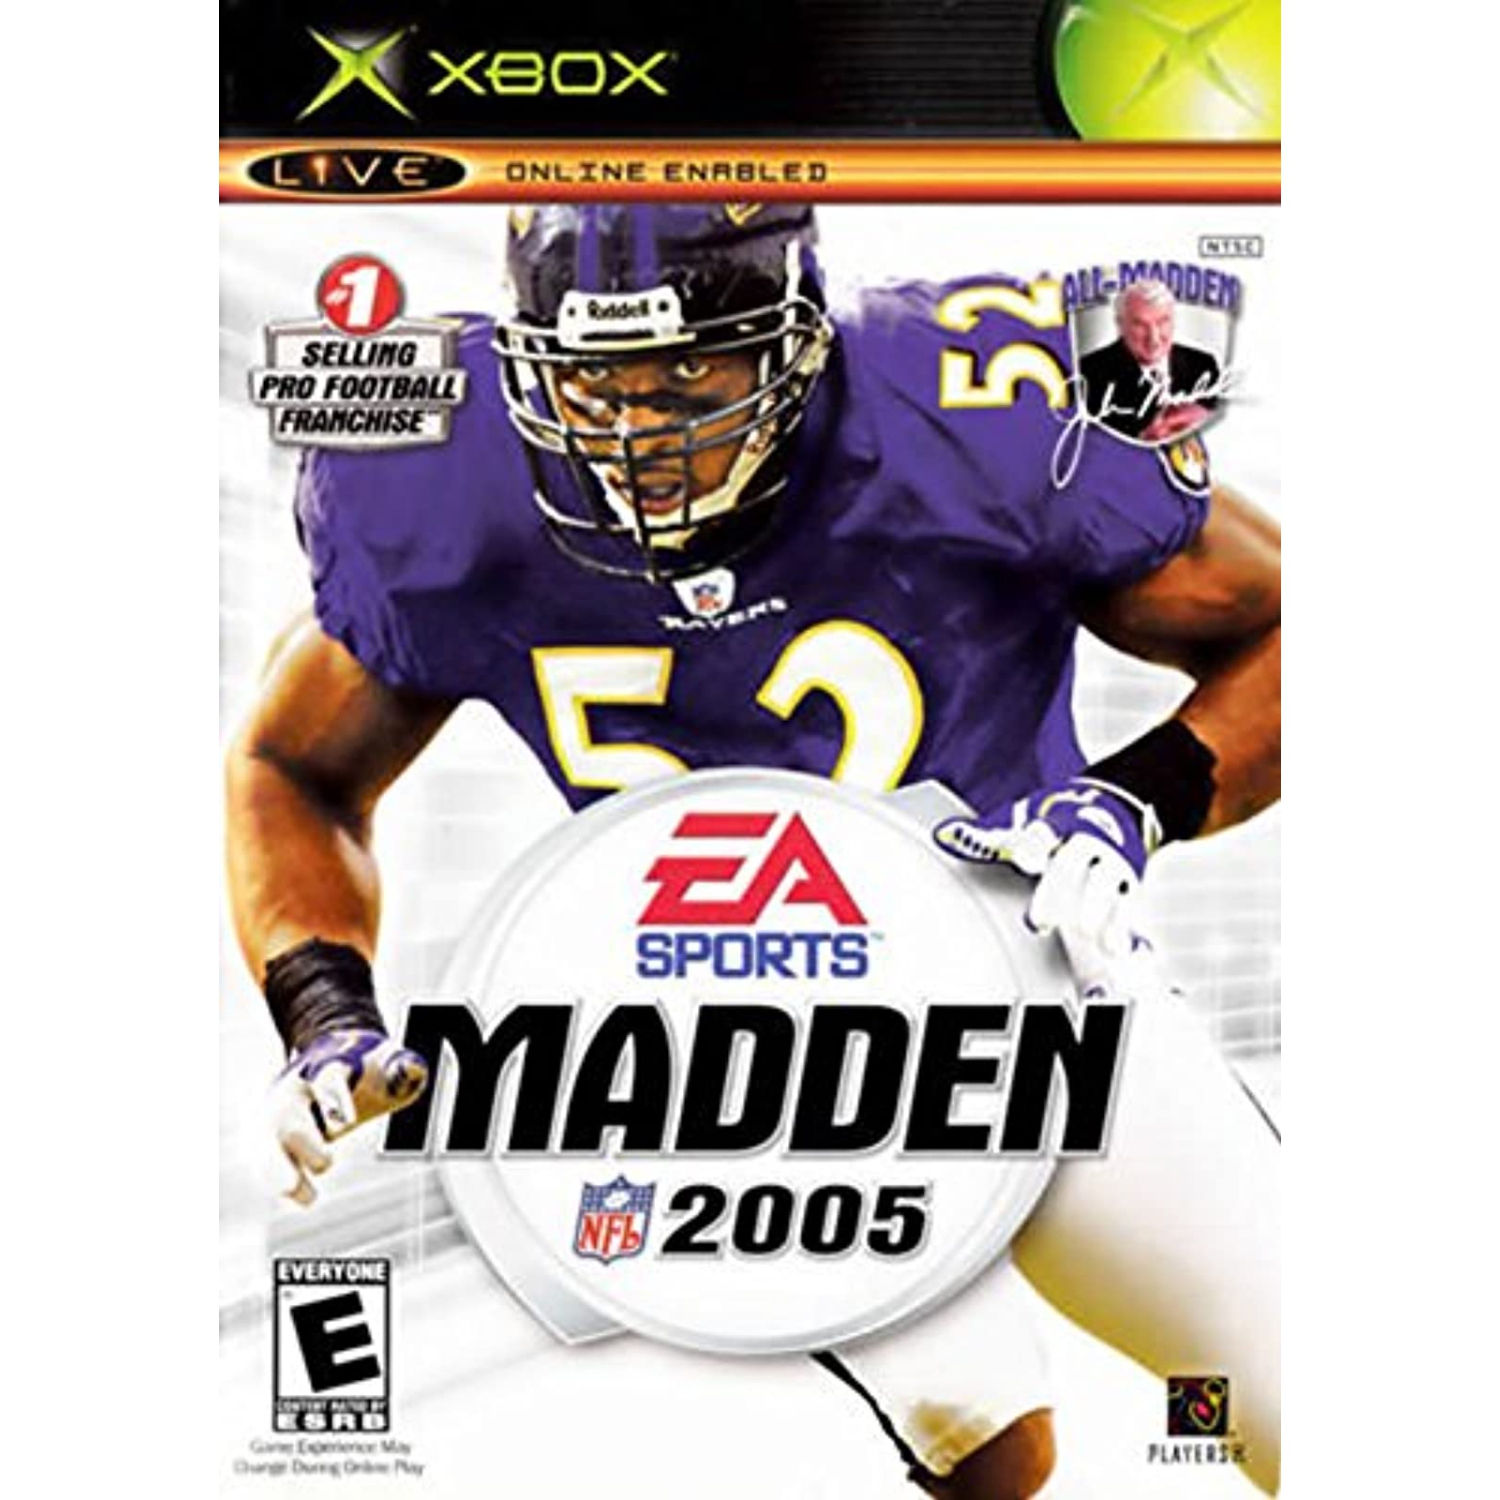 Previously Played - Madden NFL 2005 Xbox For Xbox, Physical